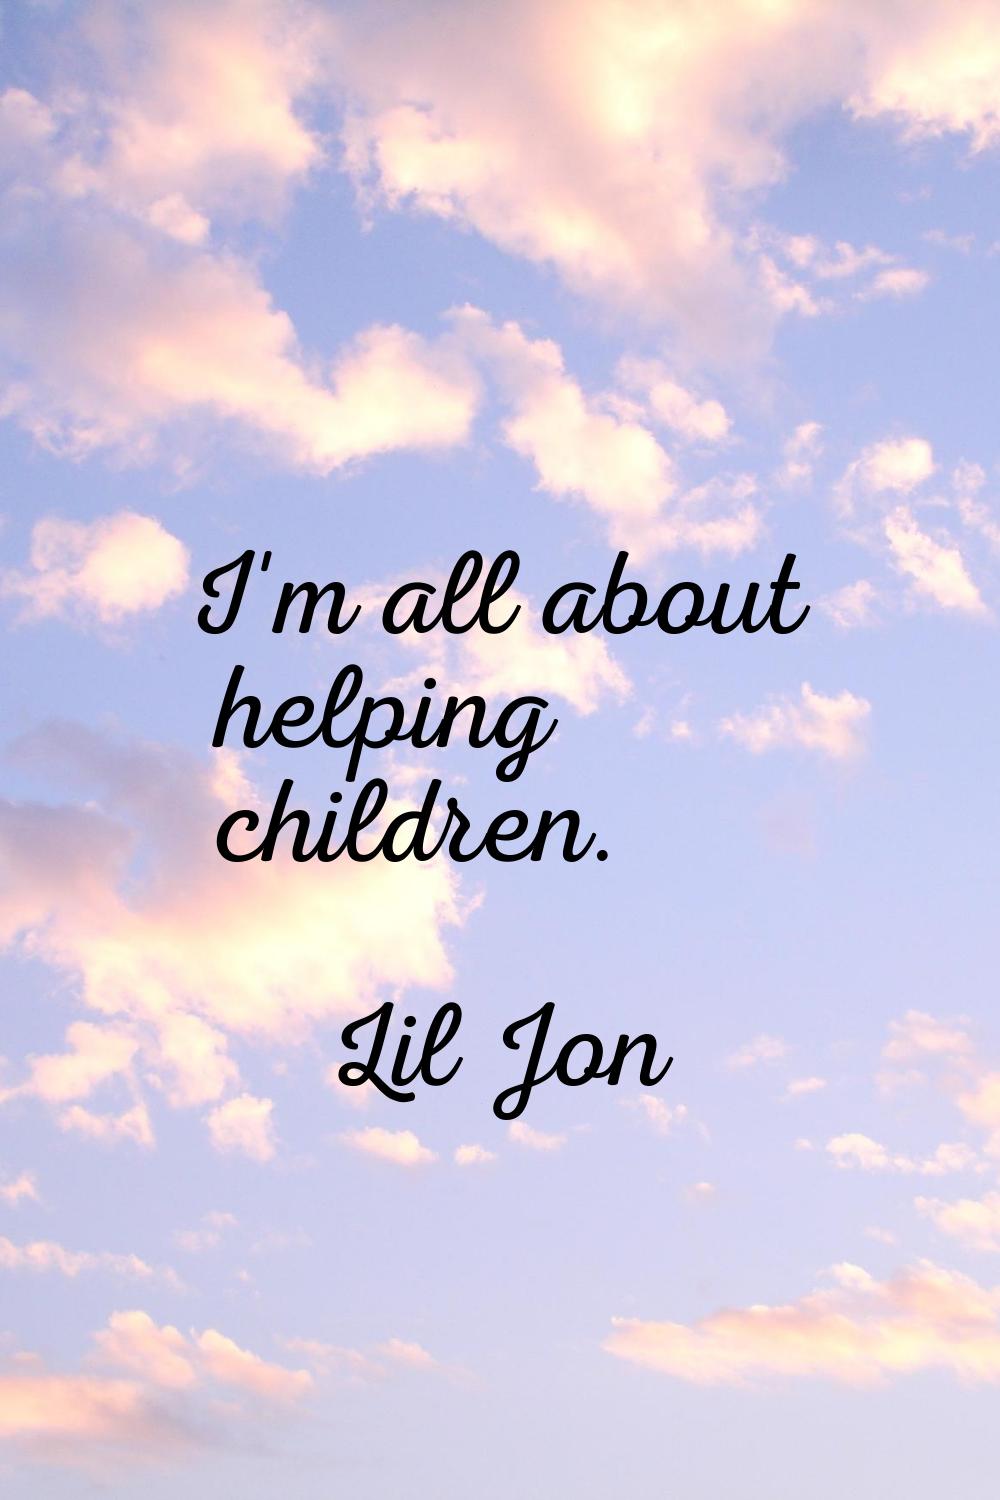 I'm all about helping children.